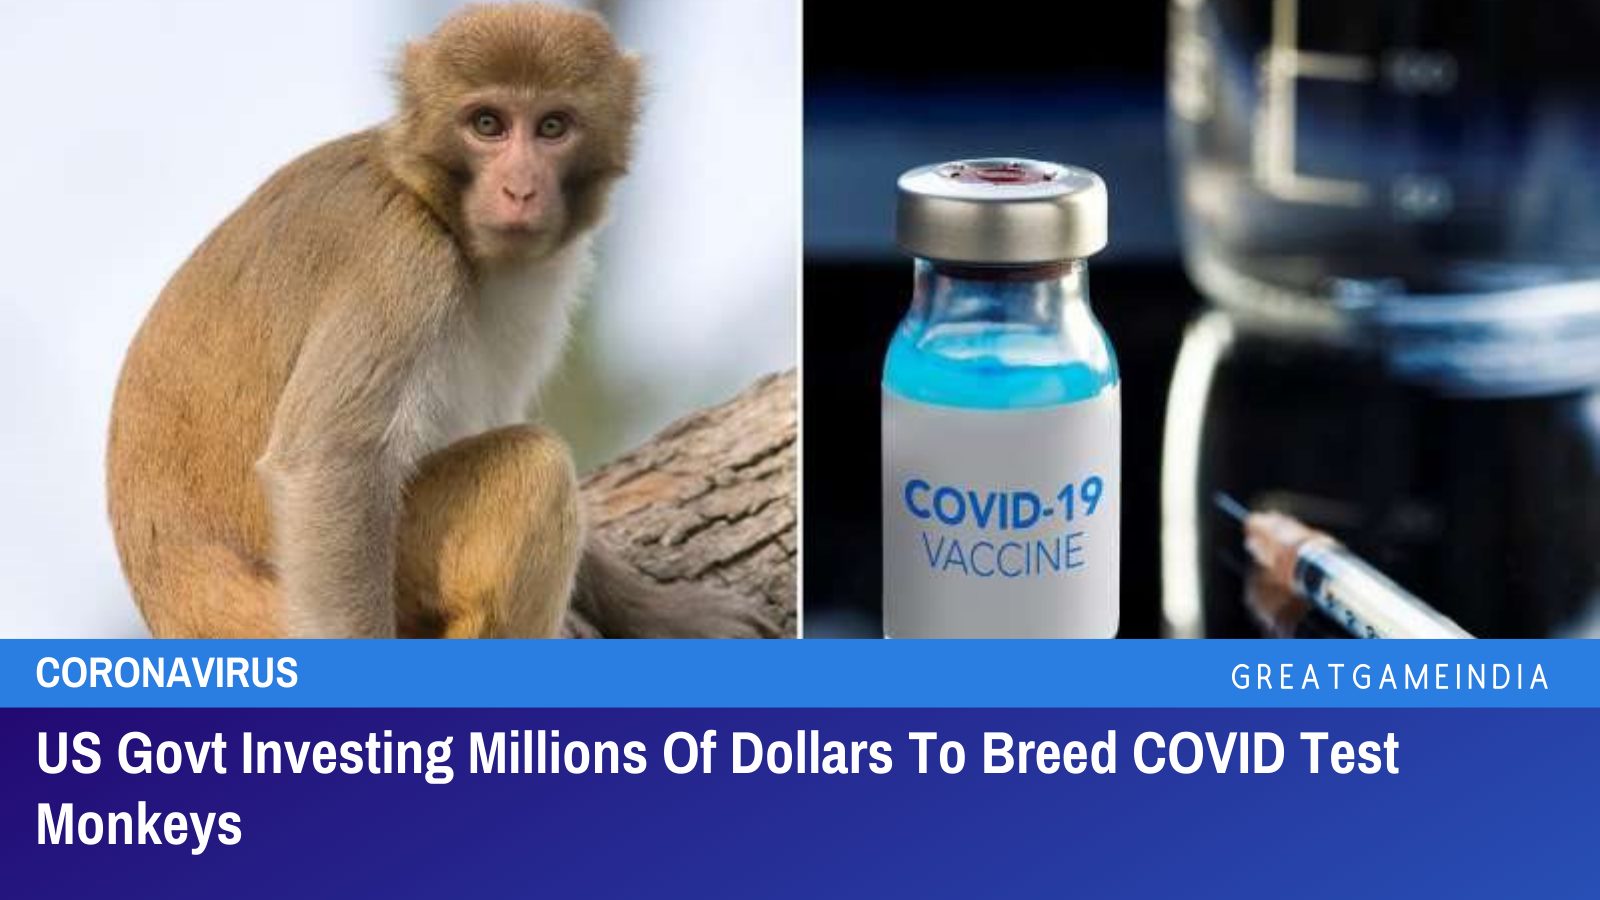 US Govt Investing Millions Of Dollars To Breed COVID Test Monkeys